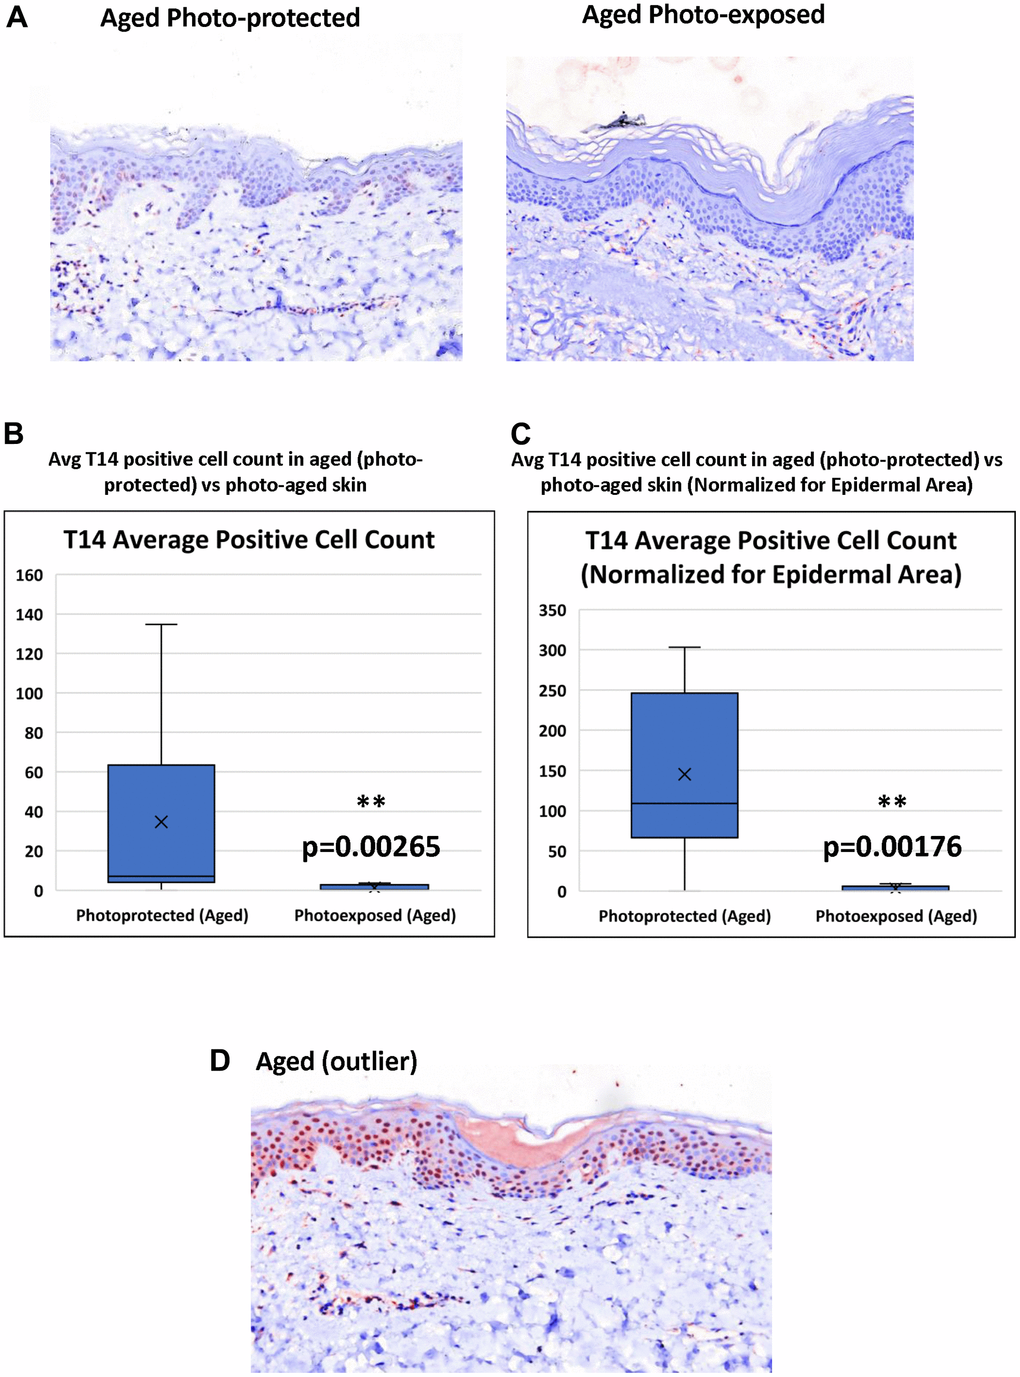 Effect of UV-light on levels of T14 in skin. (A) Immunohistochemistry of AChE T14 peptide expression is higher in aged photo-protected (50 to 70 years old) skin compared to photo-aged skin (50 to 70 years old. N=10 in each group. (B) Average number of epidermal cells with a positive AChE T14 peptide antibody stain. Aged (photo-protected) skin samples have a significantly higher expression (p value of 0.00265) of T14 positive cells compared to its expression in age matched, photo-aged skin samples. (C) Average number of epidermal cells with a positive AChE T14 peptide antibody stain normalized by epidermal area. Aged (photo-protected) skin samples have a significantly higher expression (p value of 0.00176) of T14 positive cells per epidermal area compared to its expression in age-matched photo-exposed skin. (D) Immunohistochemistry of AChE T14 peptide expression is higher in 1 outlier of the aged group.